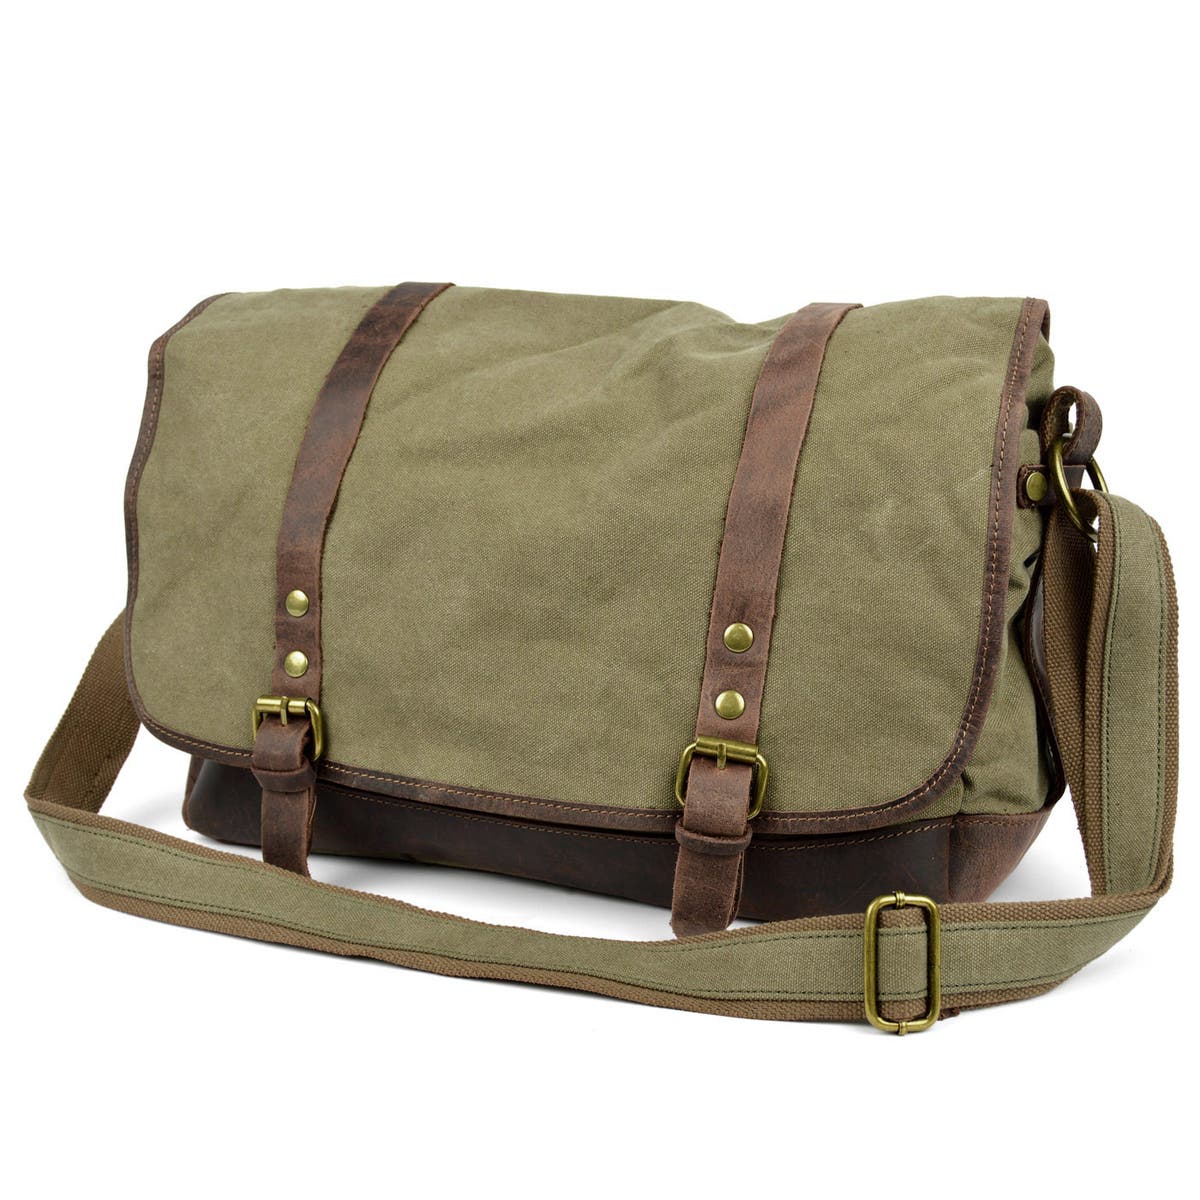 Bags for men | 139 Styles for men in stock | Prices start from £39